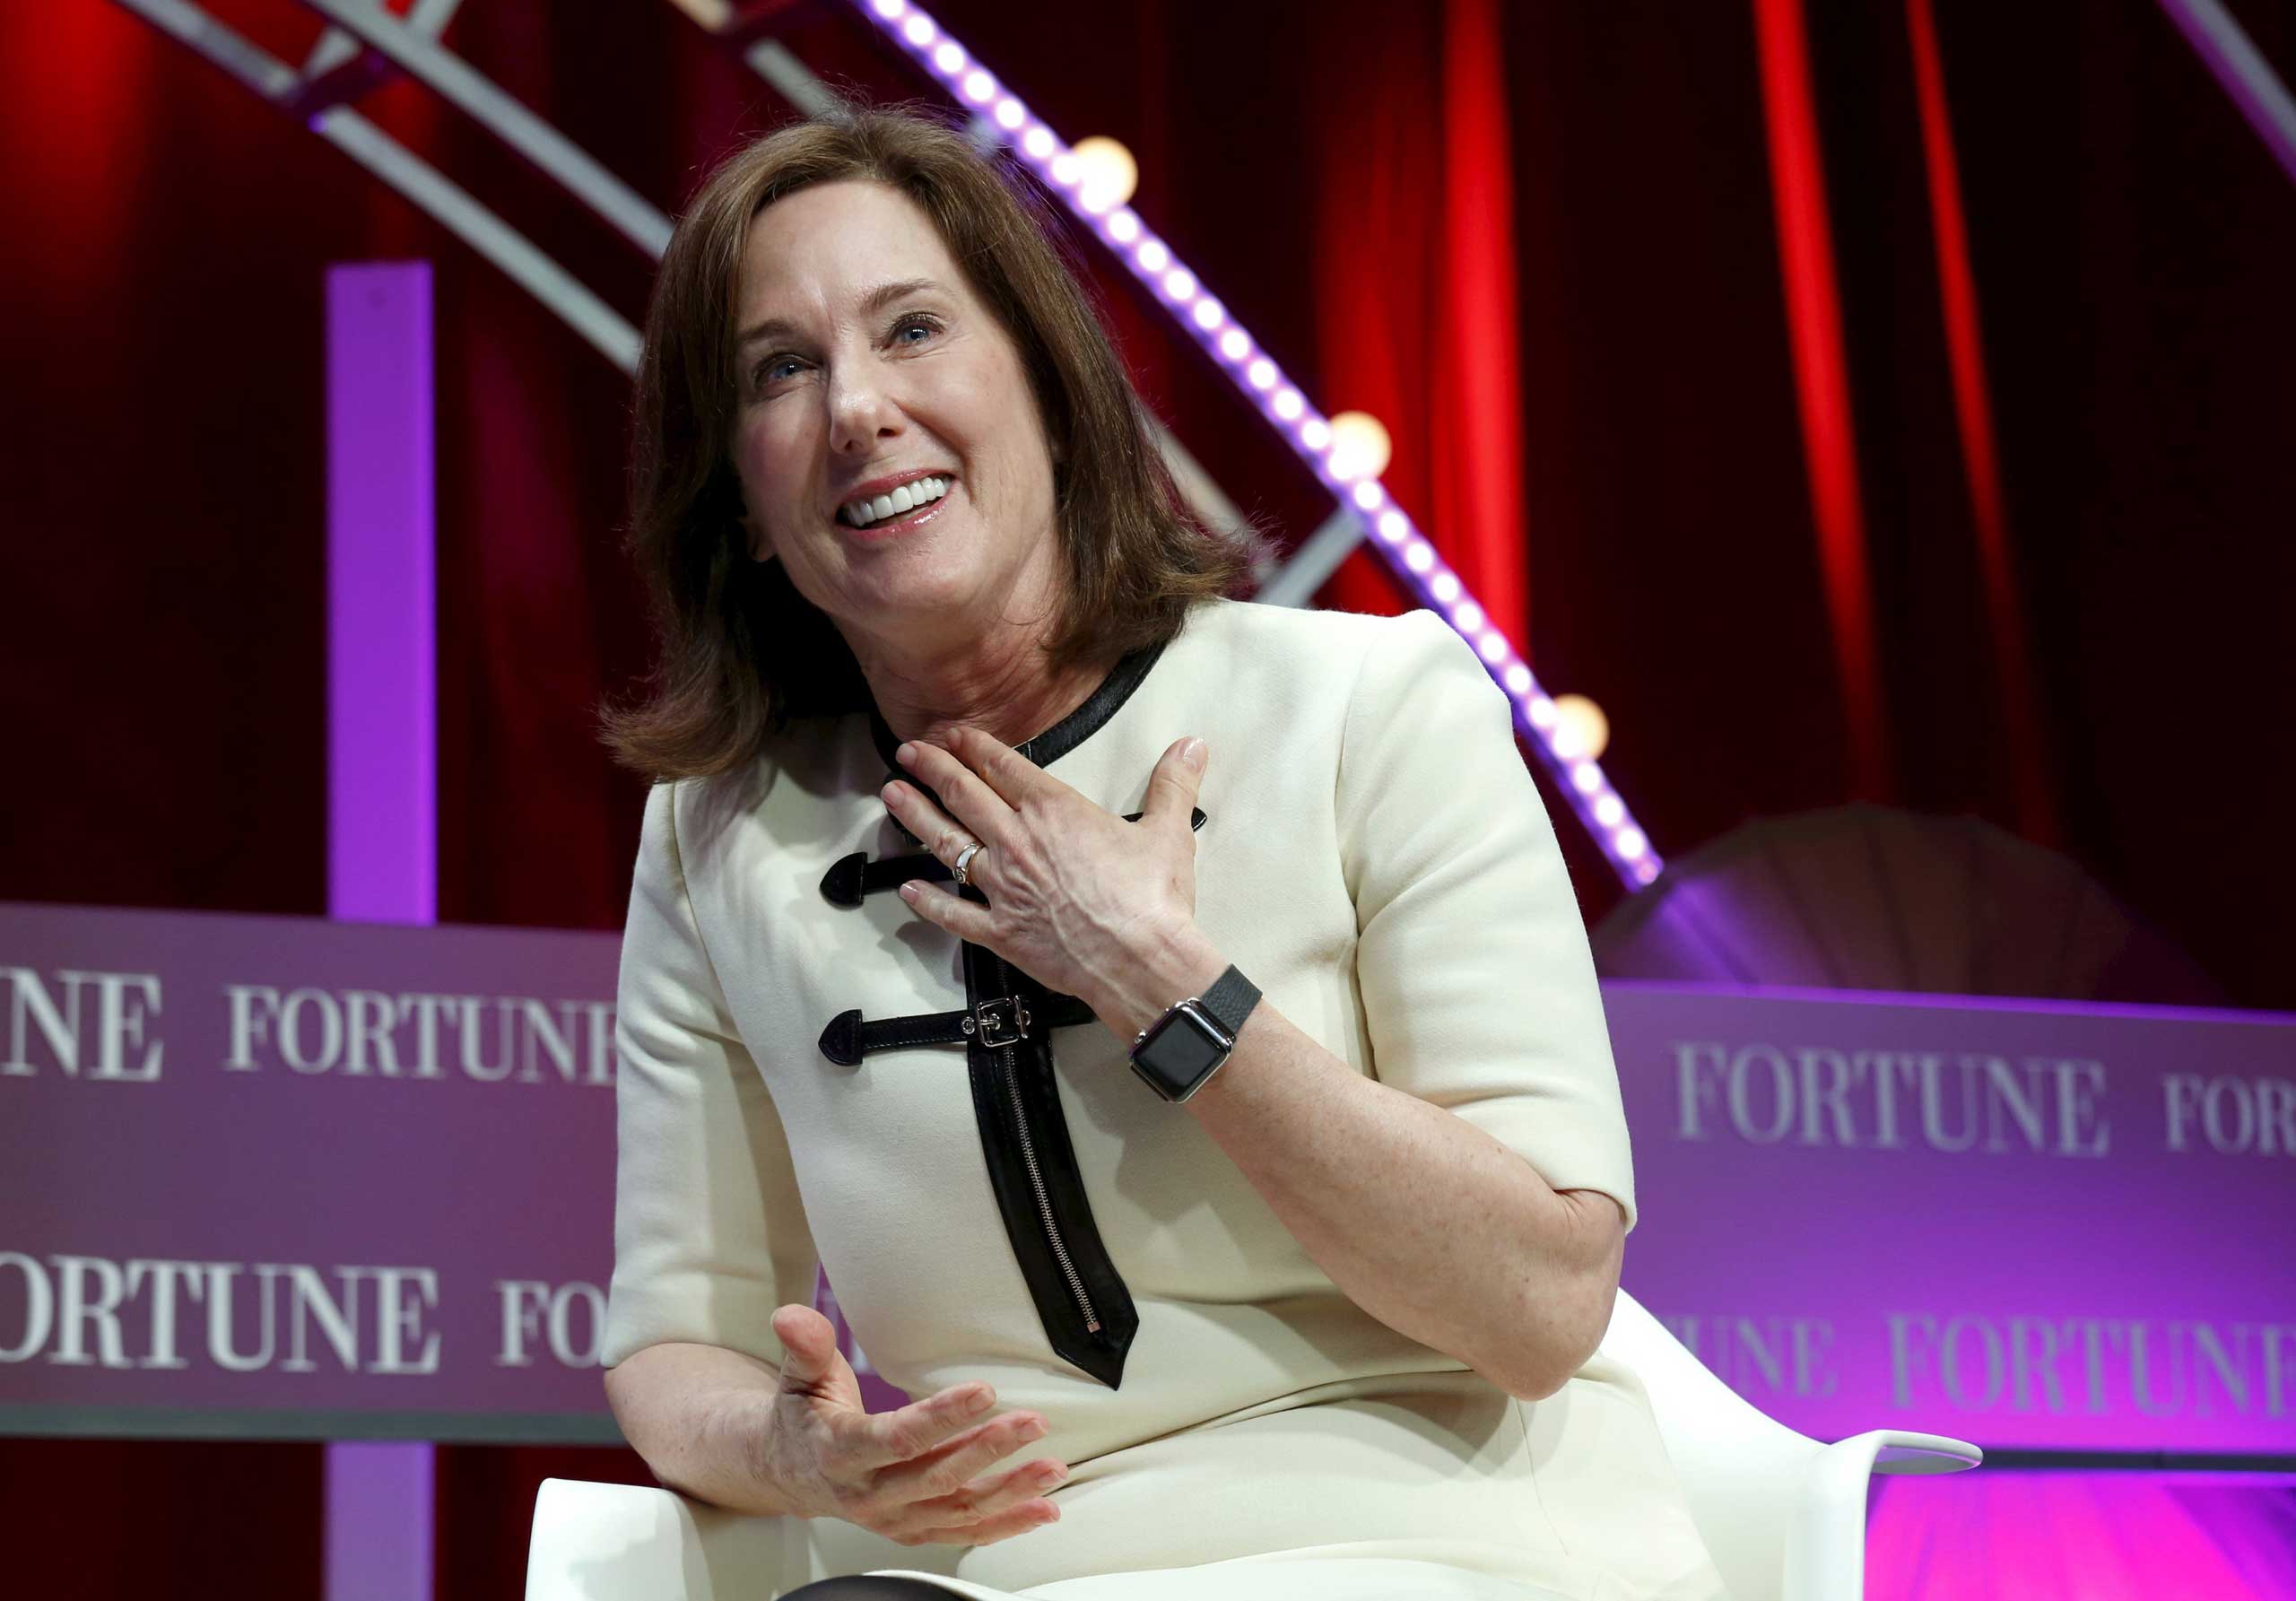 Lucasfilm's President Kathleen Kennedy speaks at Fortune's Most Powerful Women Summit in Washington Oct. 13, 2015. (Kevin Lamarque—Reuters)